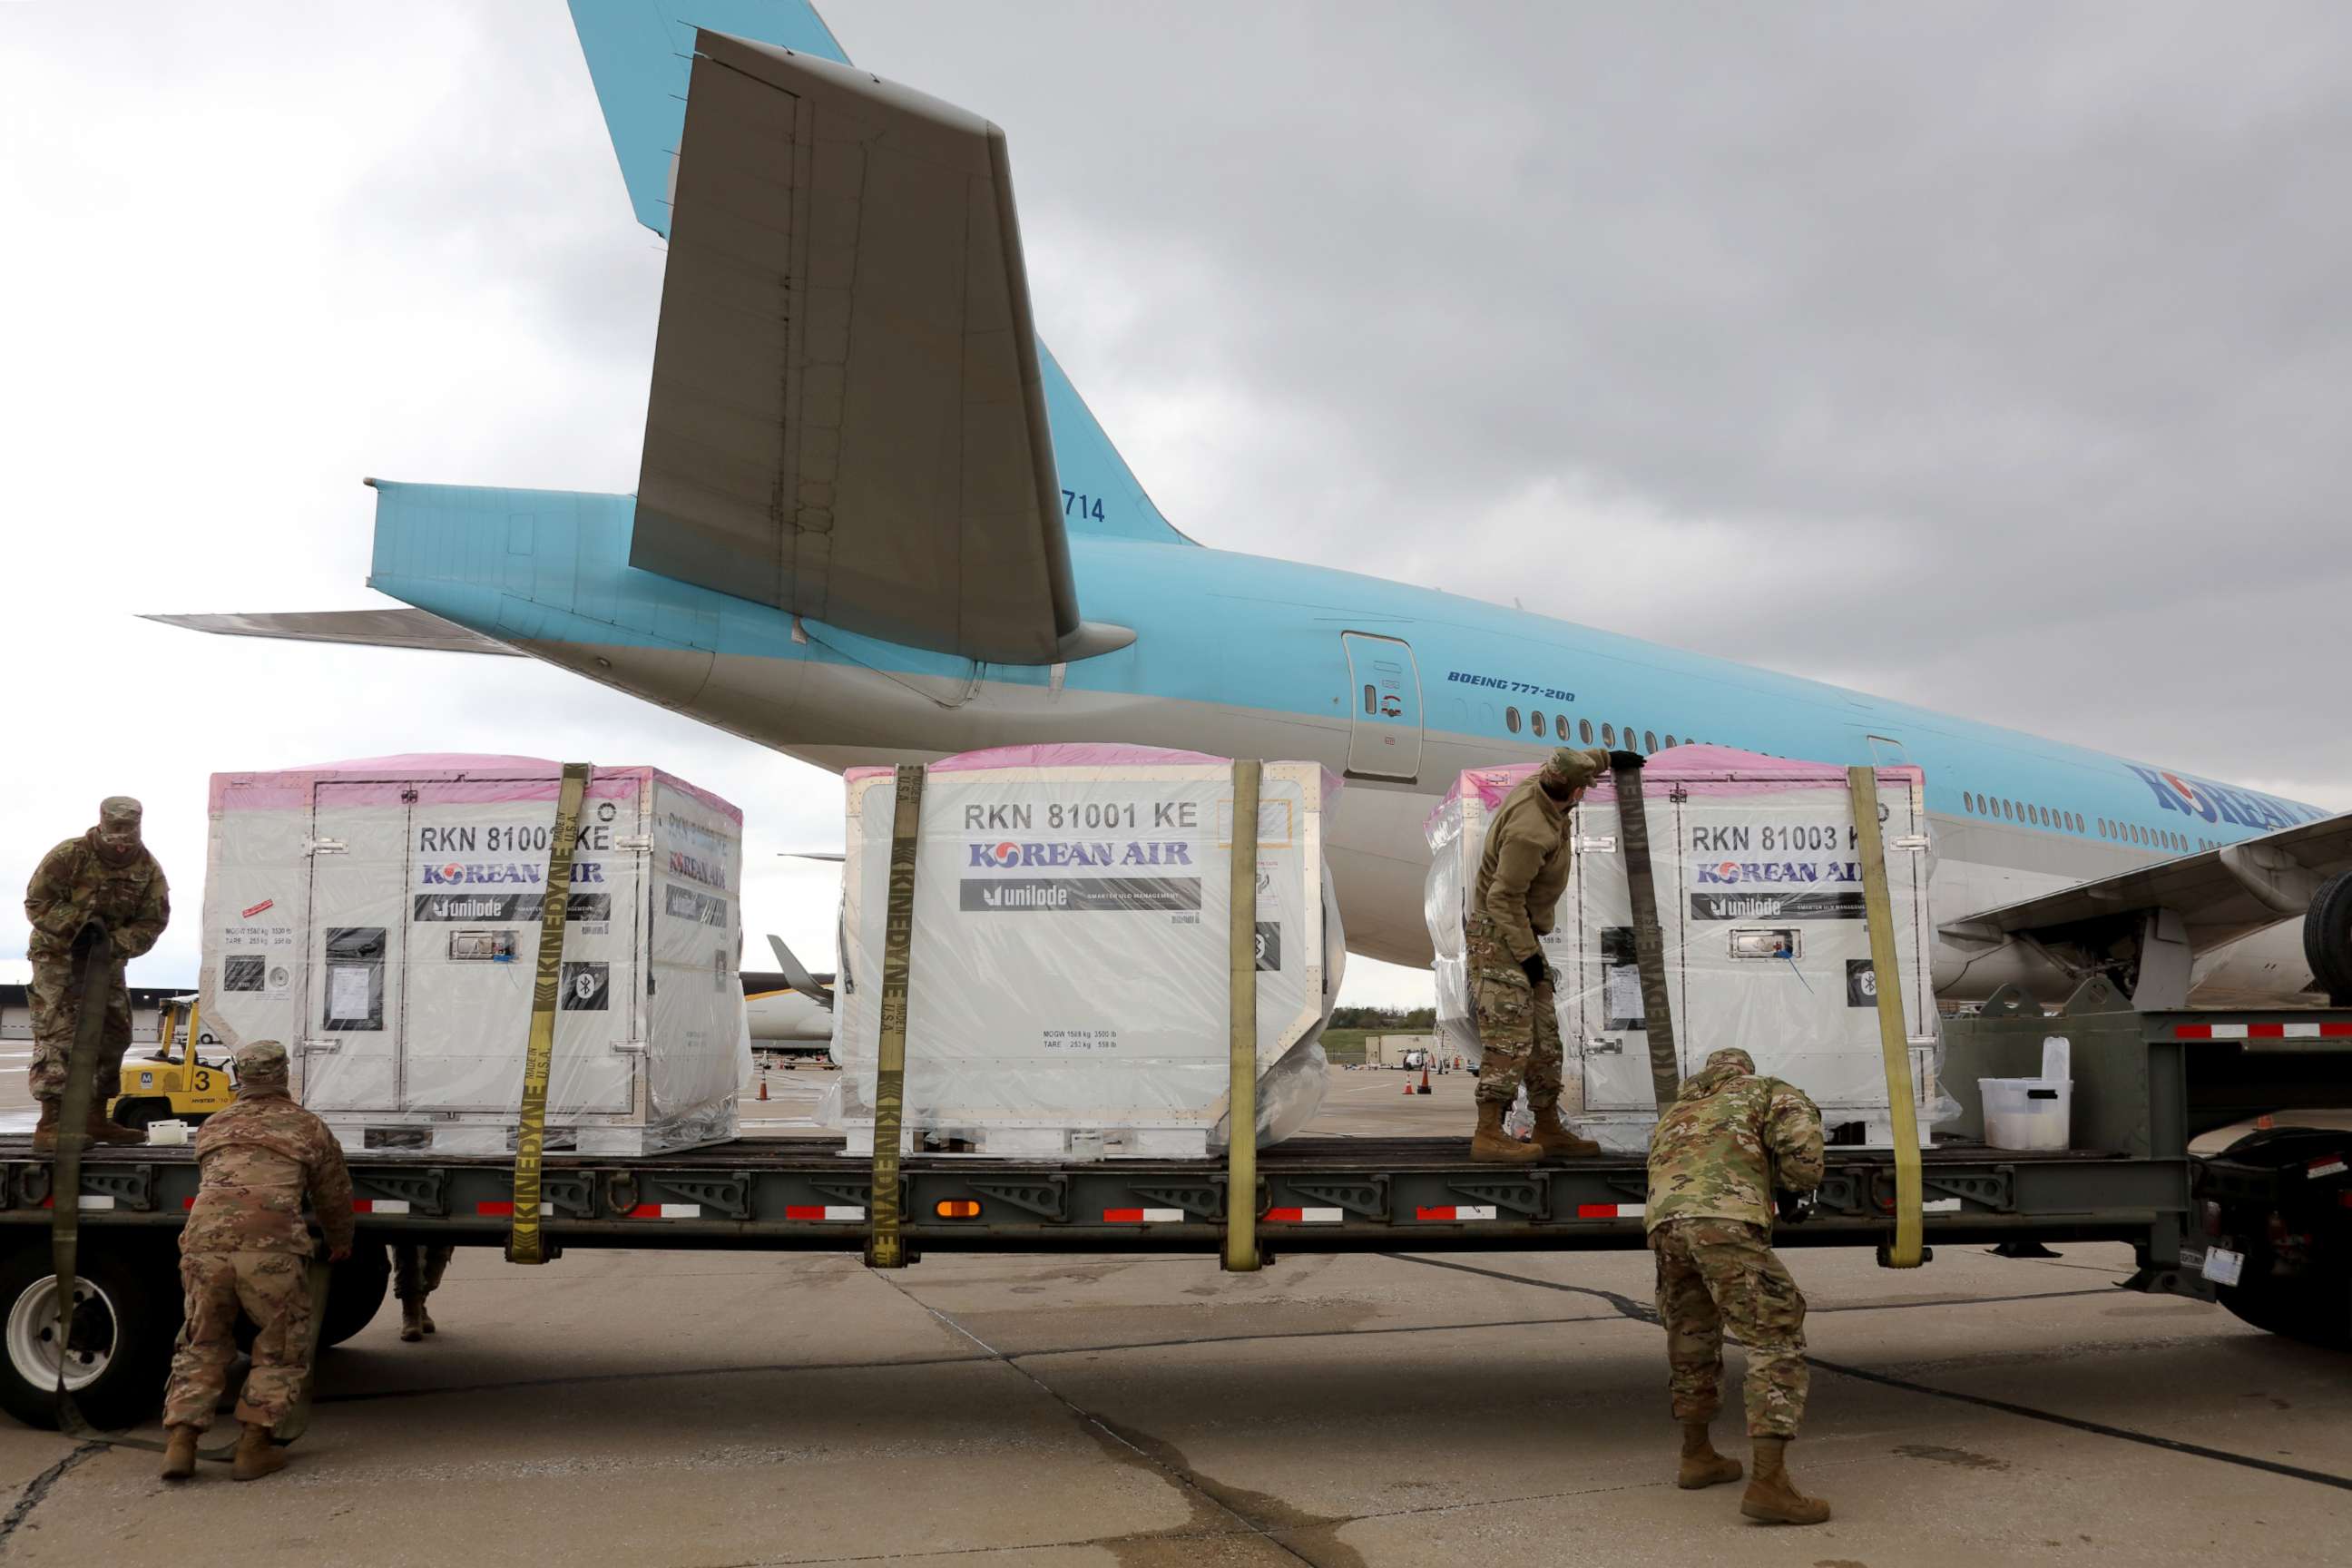 PHOTO: COVID-19 testing kits from LabGenomics are unloaded from a Korean Air plane at Baltimore-Washington International Airport on Monday, April 20, 2020.